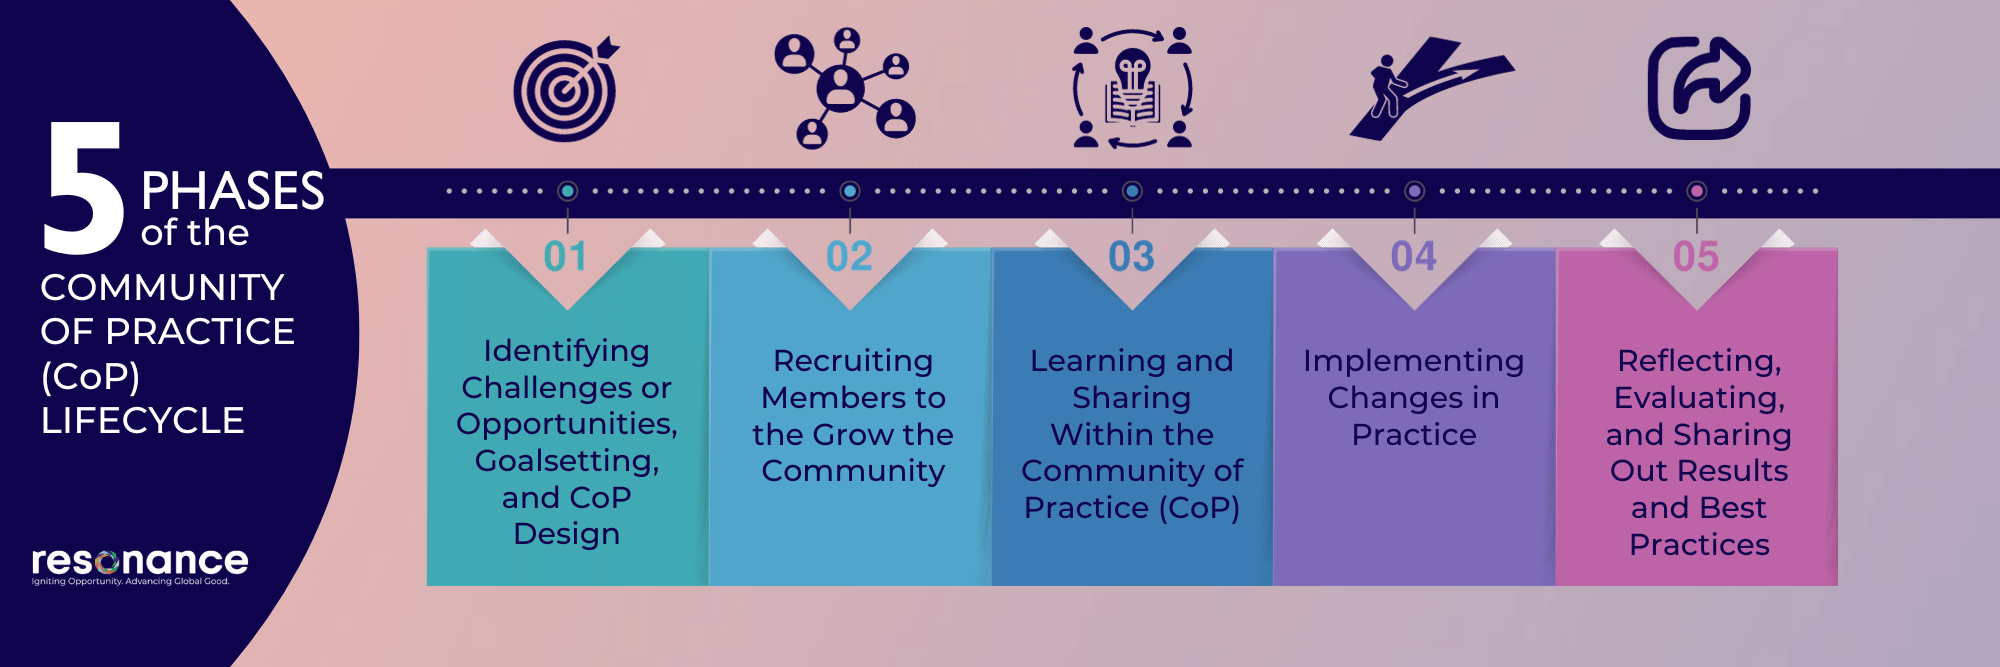 Communities of Practice Phases